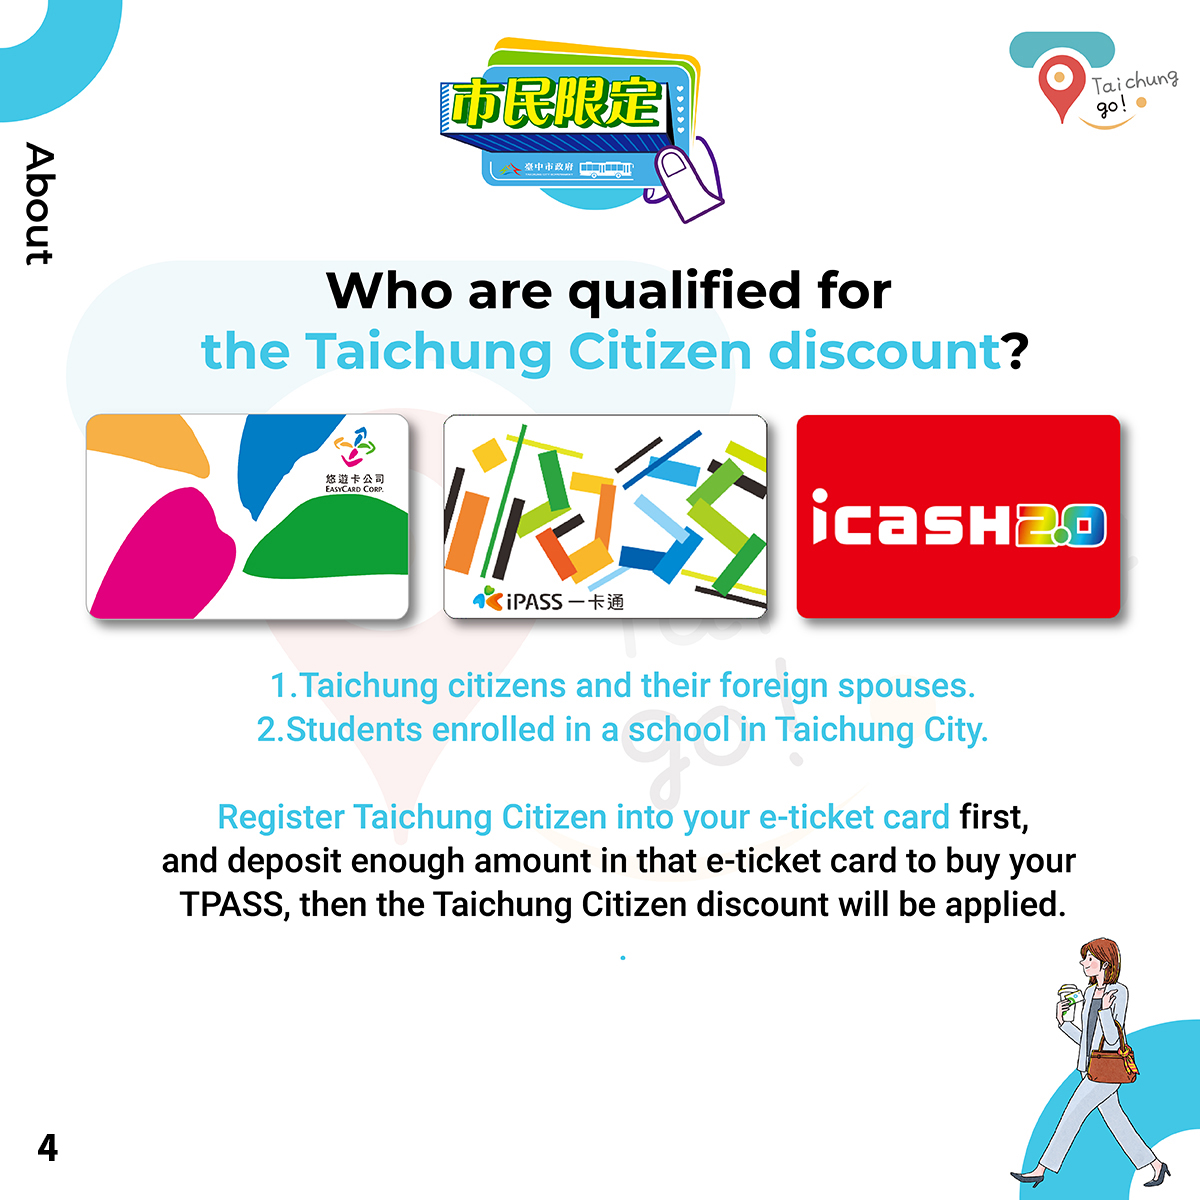 Taichung citizenstheir foreign spouses and Students enrolled in a school that is in Taichung City Can Use Taichung Citizen discount. First you register Taichung Citizen into your e-ticket card. Second your e-ticket card deposit enough amount in that e-ticket card to buy your TPASS,then the Taichung Citizen discount will be applied.